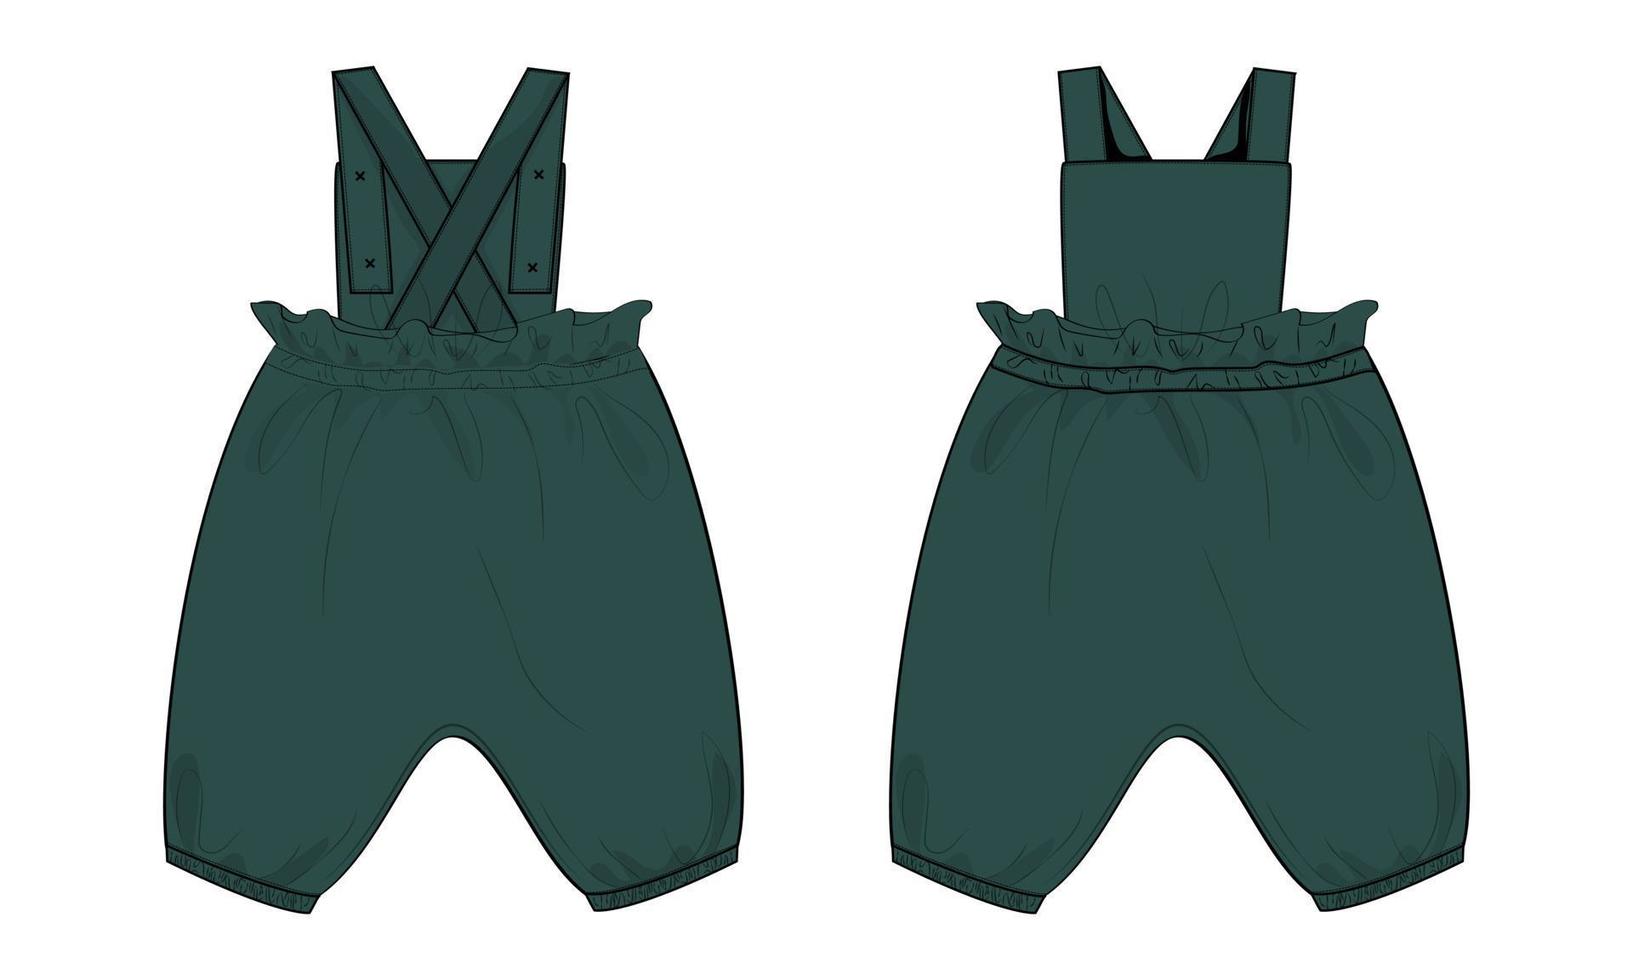 Kids Dungaree Dress Design Technical Fashion Flat Sketch Vector illustration Template Front And Back views.